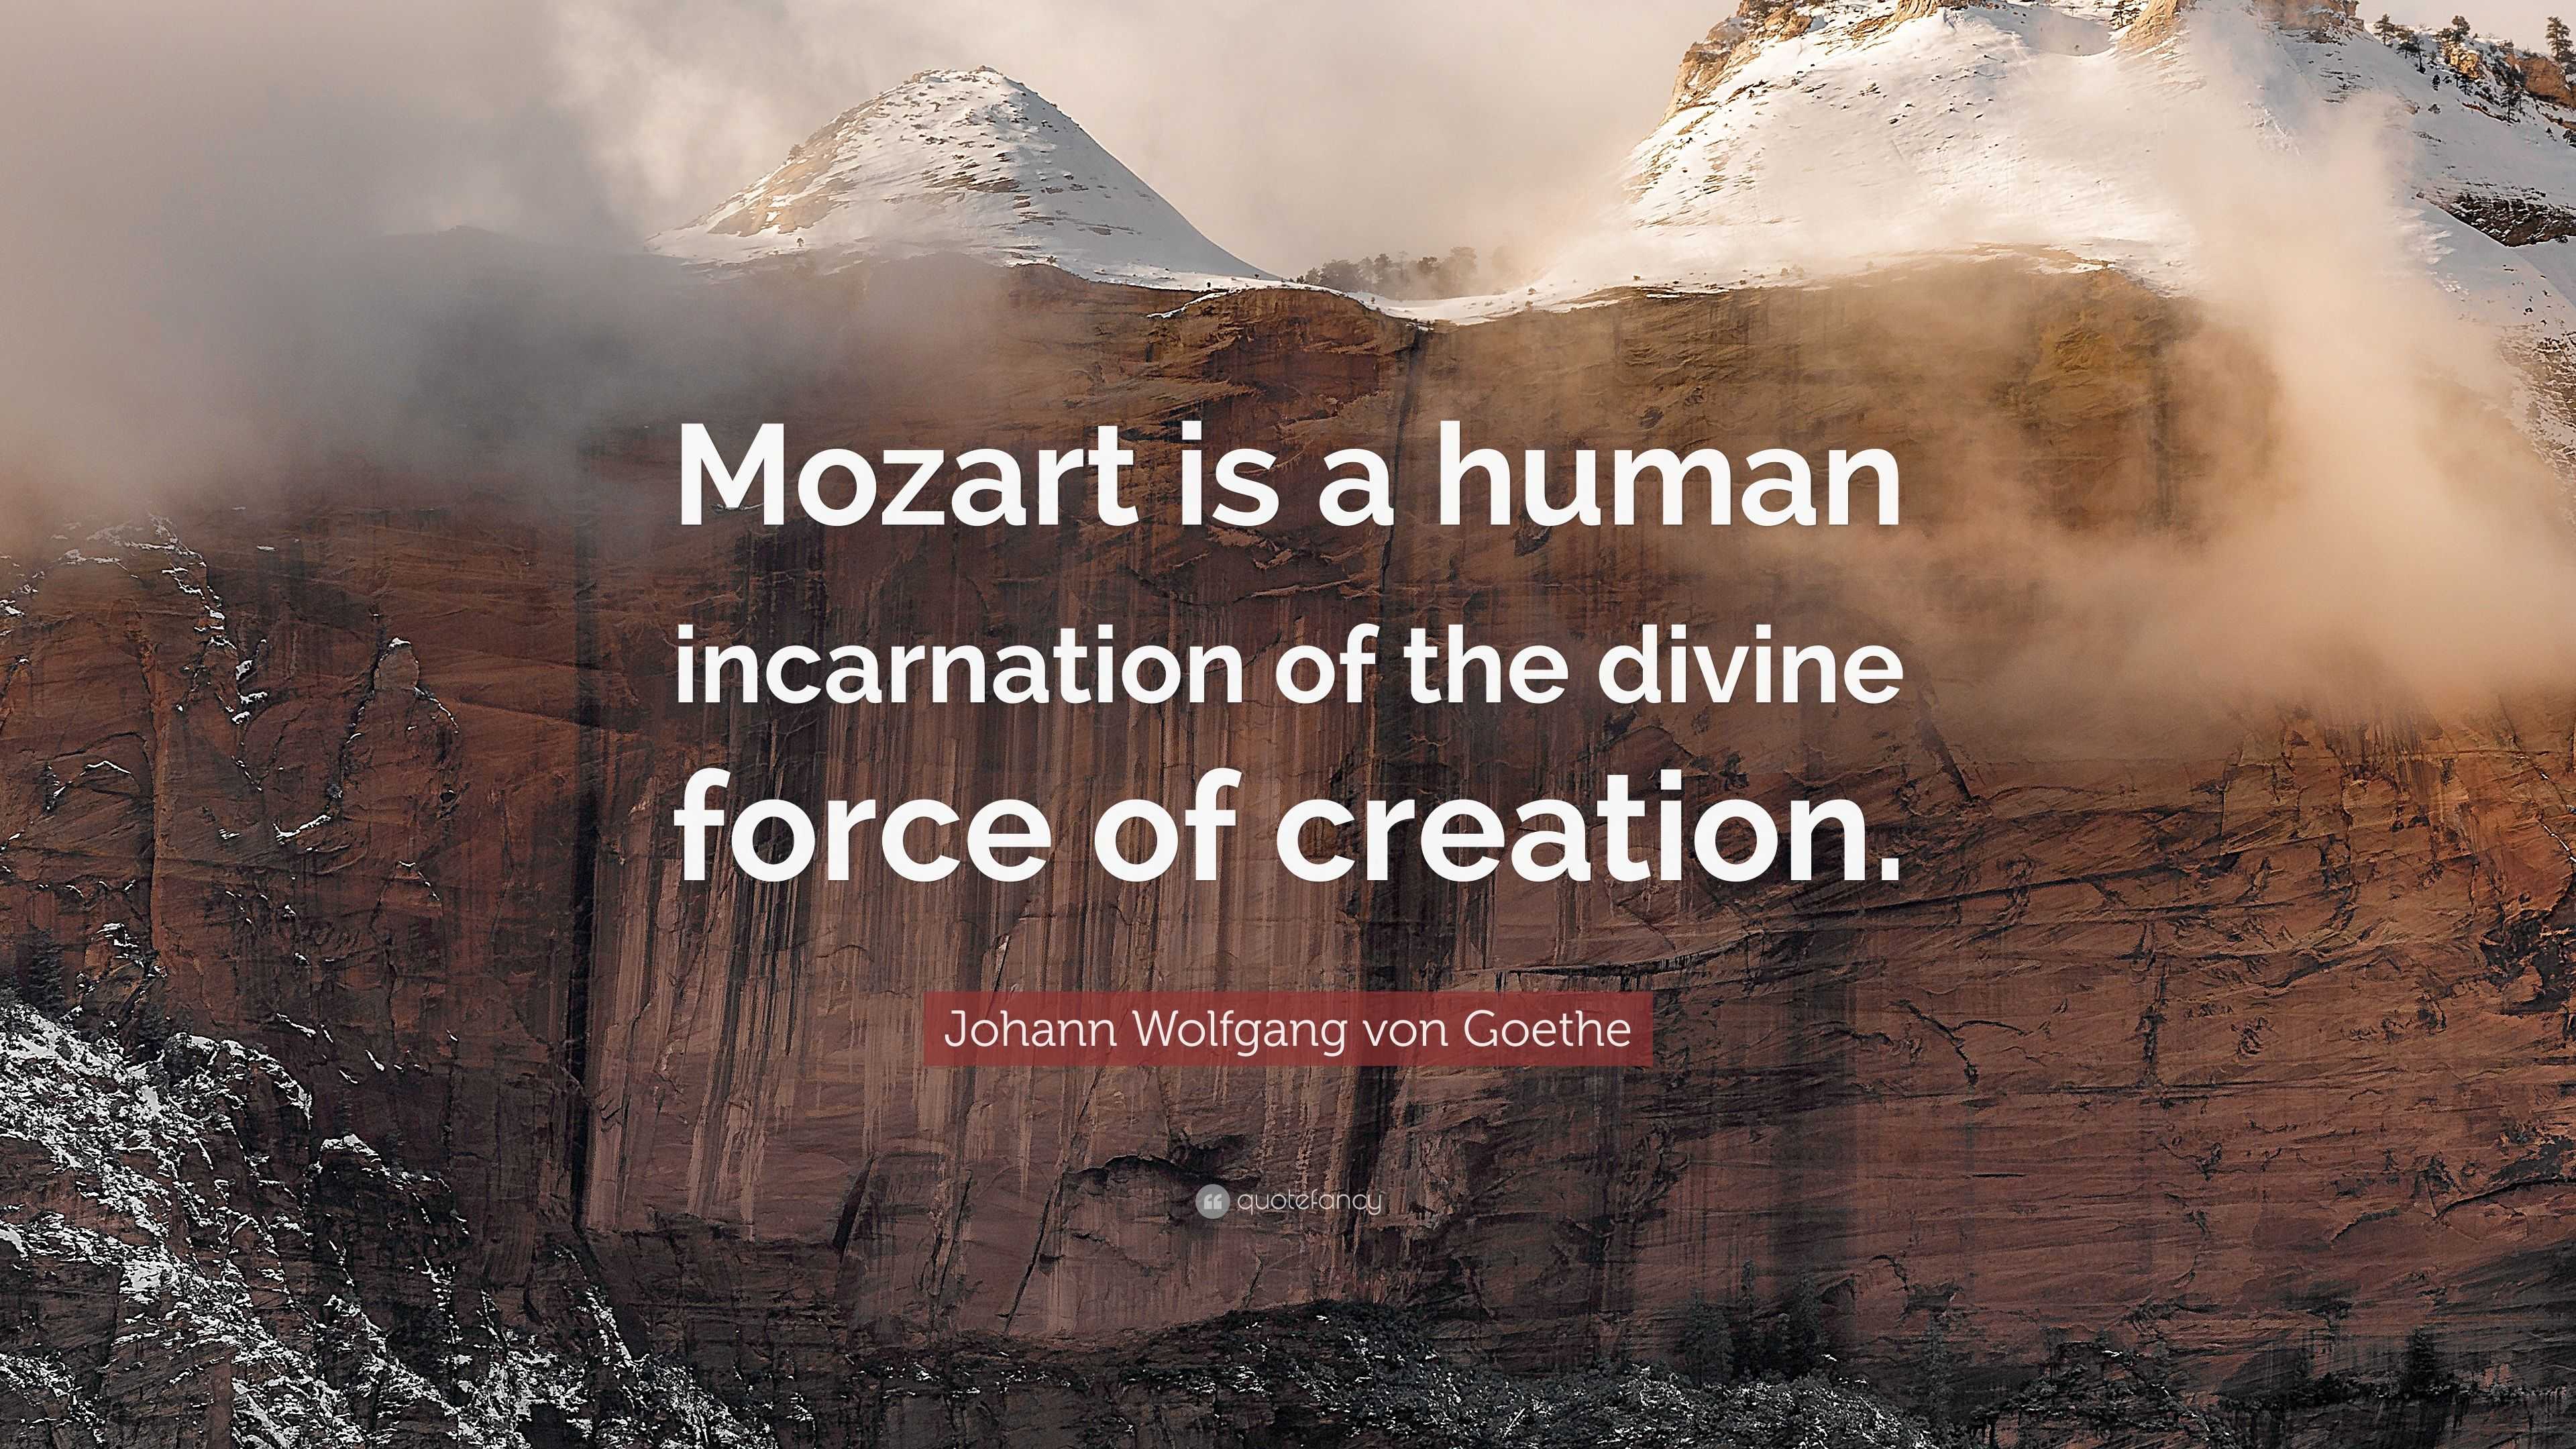 Johann Wolfgang von Goethe Quote: “Mozart is a human incarnation of the ...